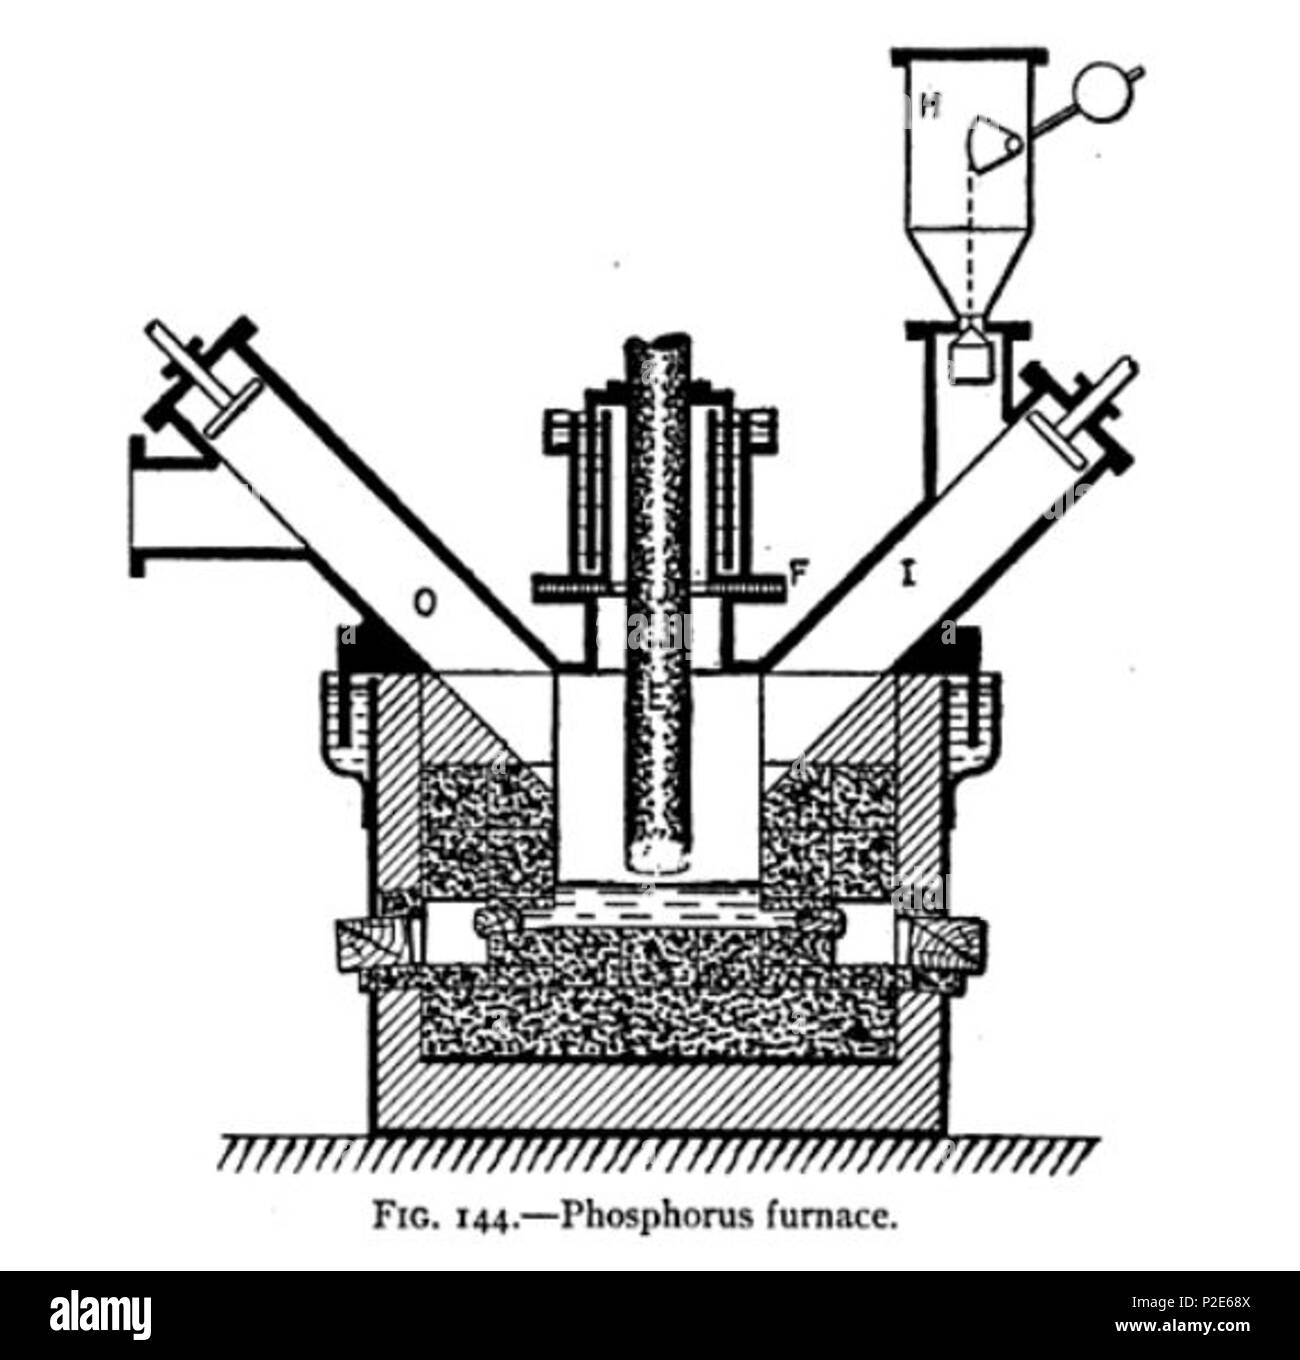 . English: Design for an electric arc furnace to produce phosphorus from 1907 patent by G.C. Landis. 1907. G.C. Landis 41 Phosphorus Furnace by G.C. Landis Stock Photo